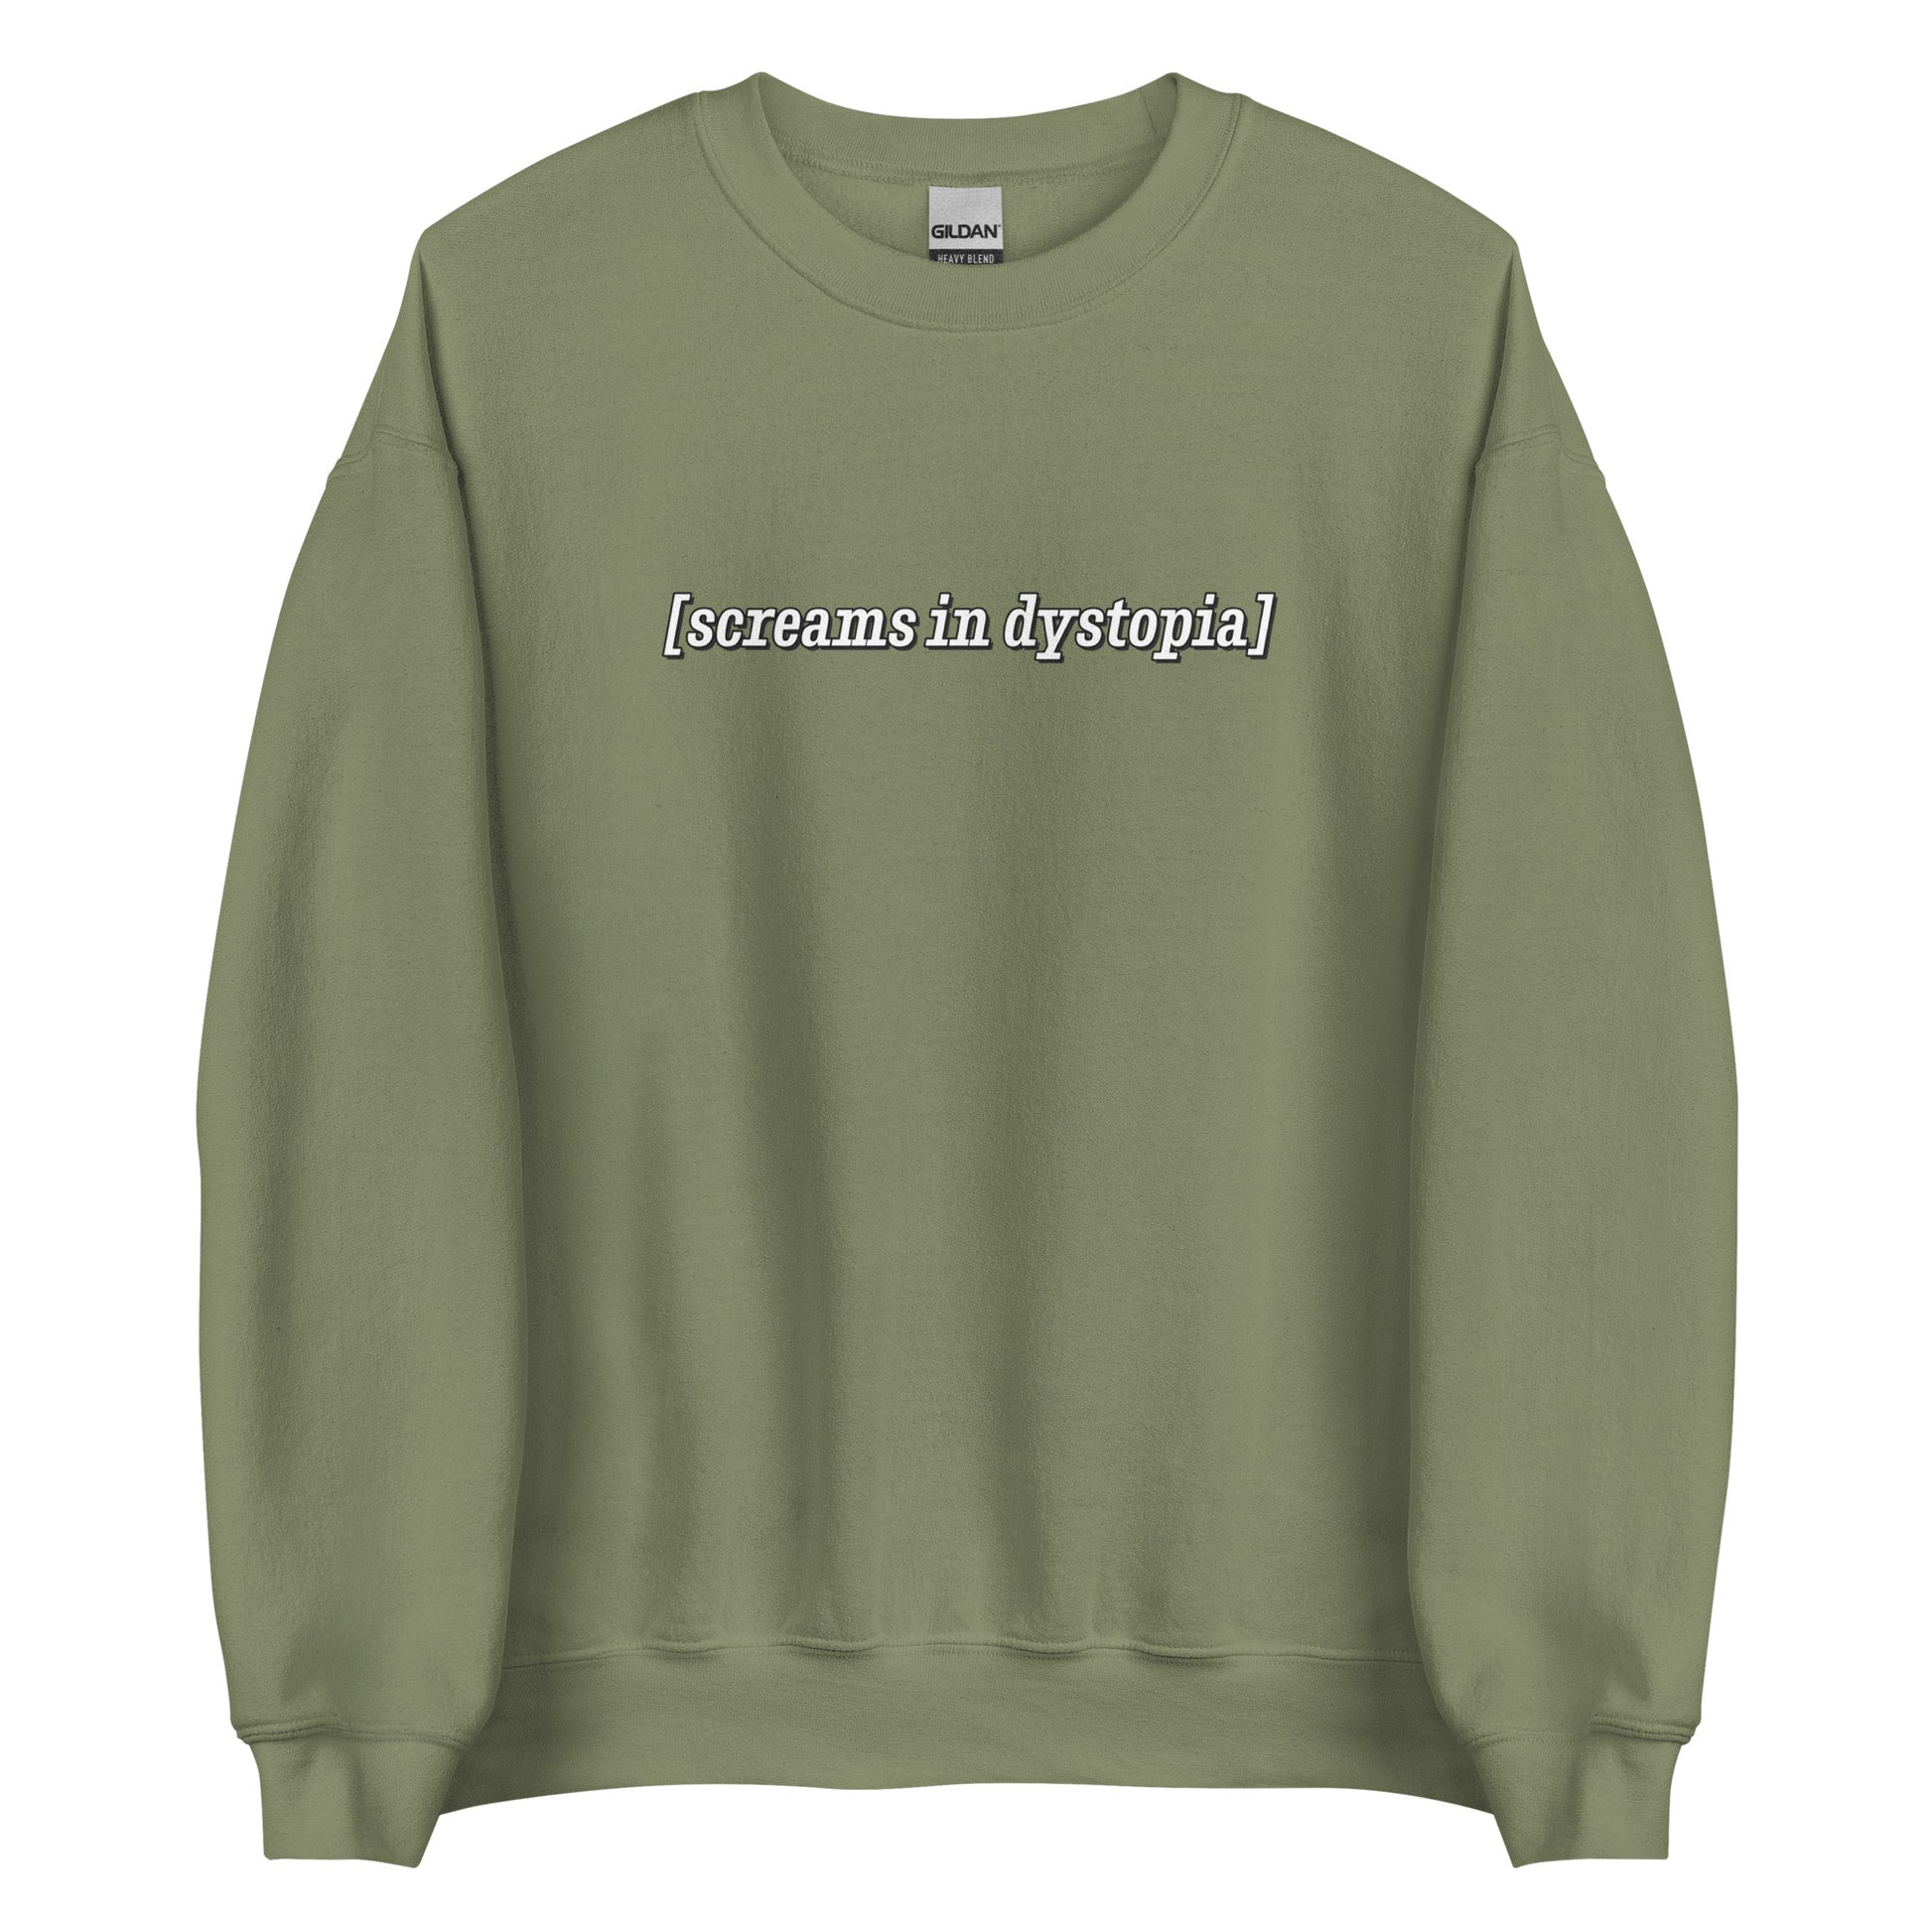 An olive green crewneck sweatshirt with white text in the style of subtitles. The text reads "[screams in dystopia]".